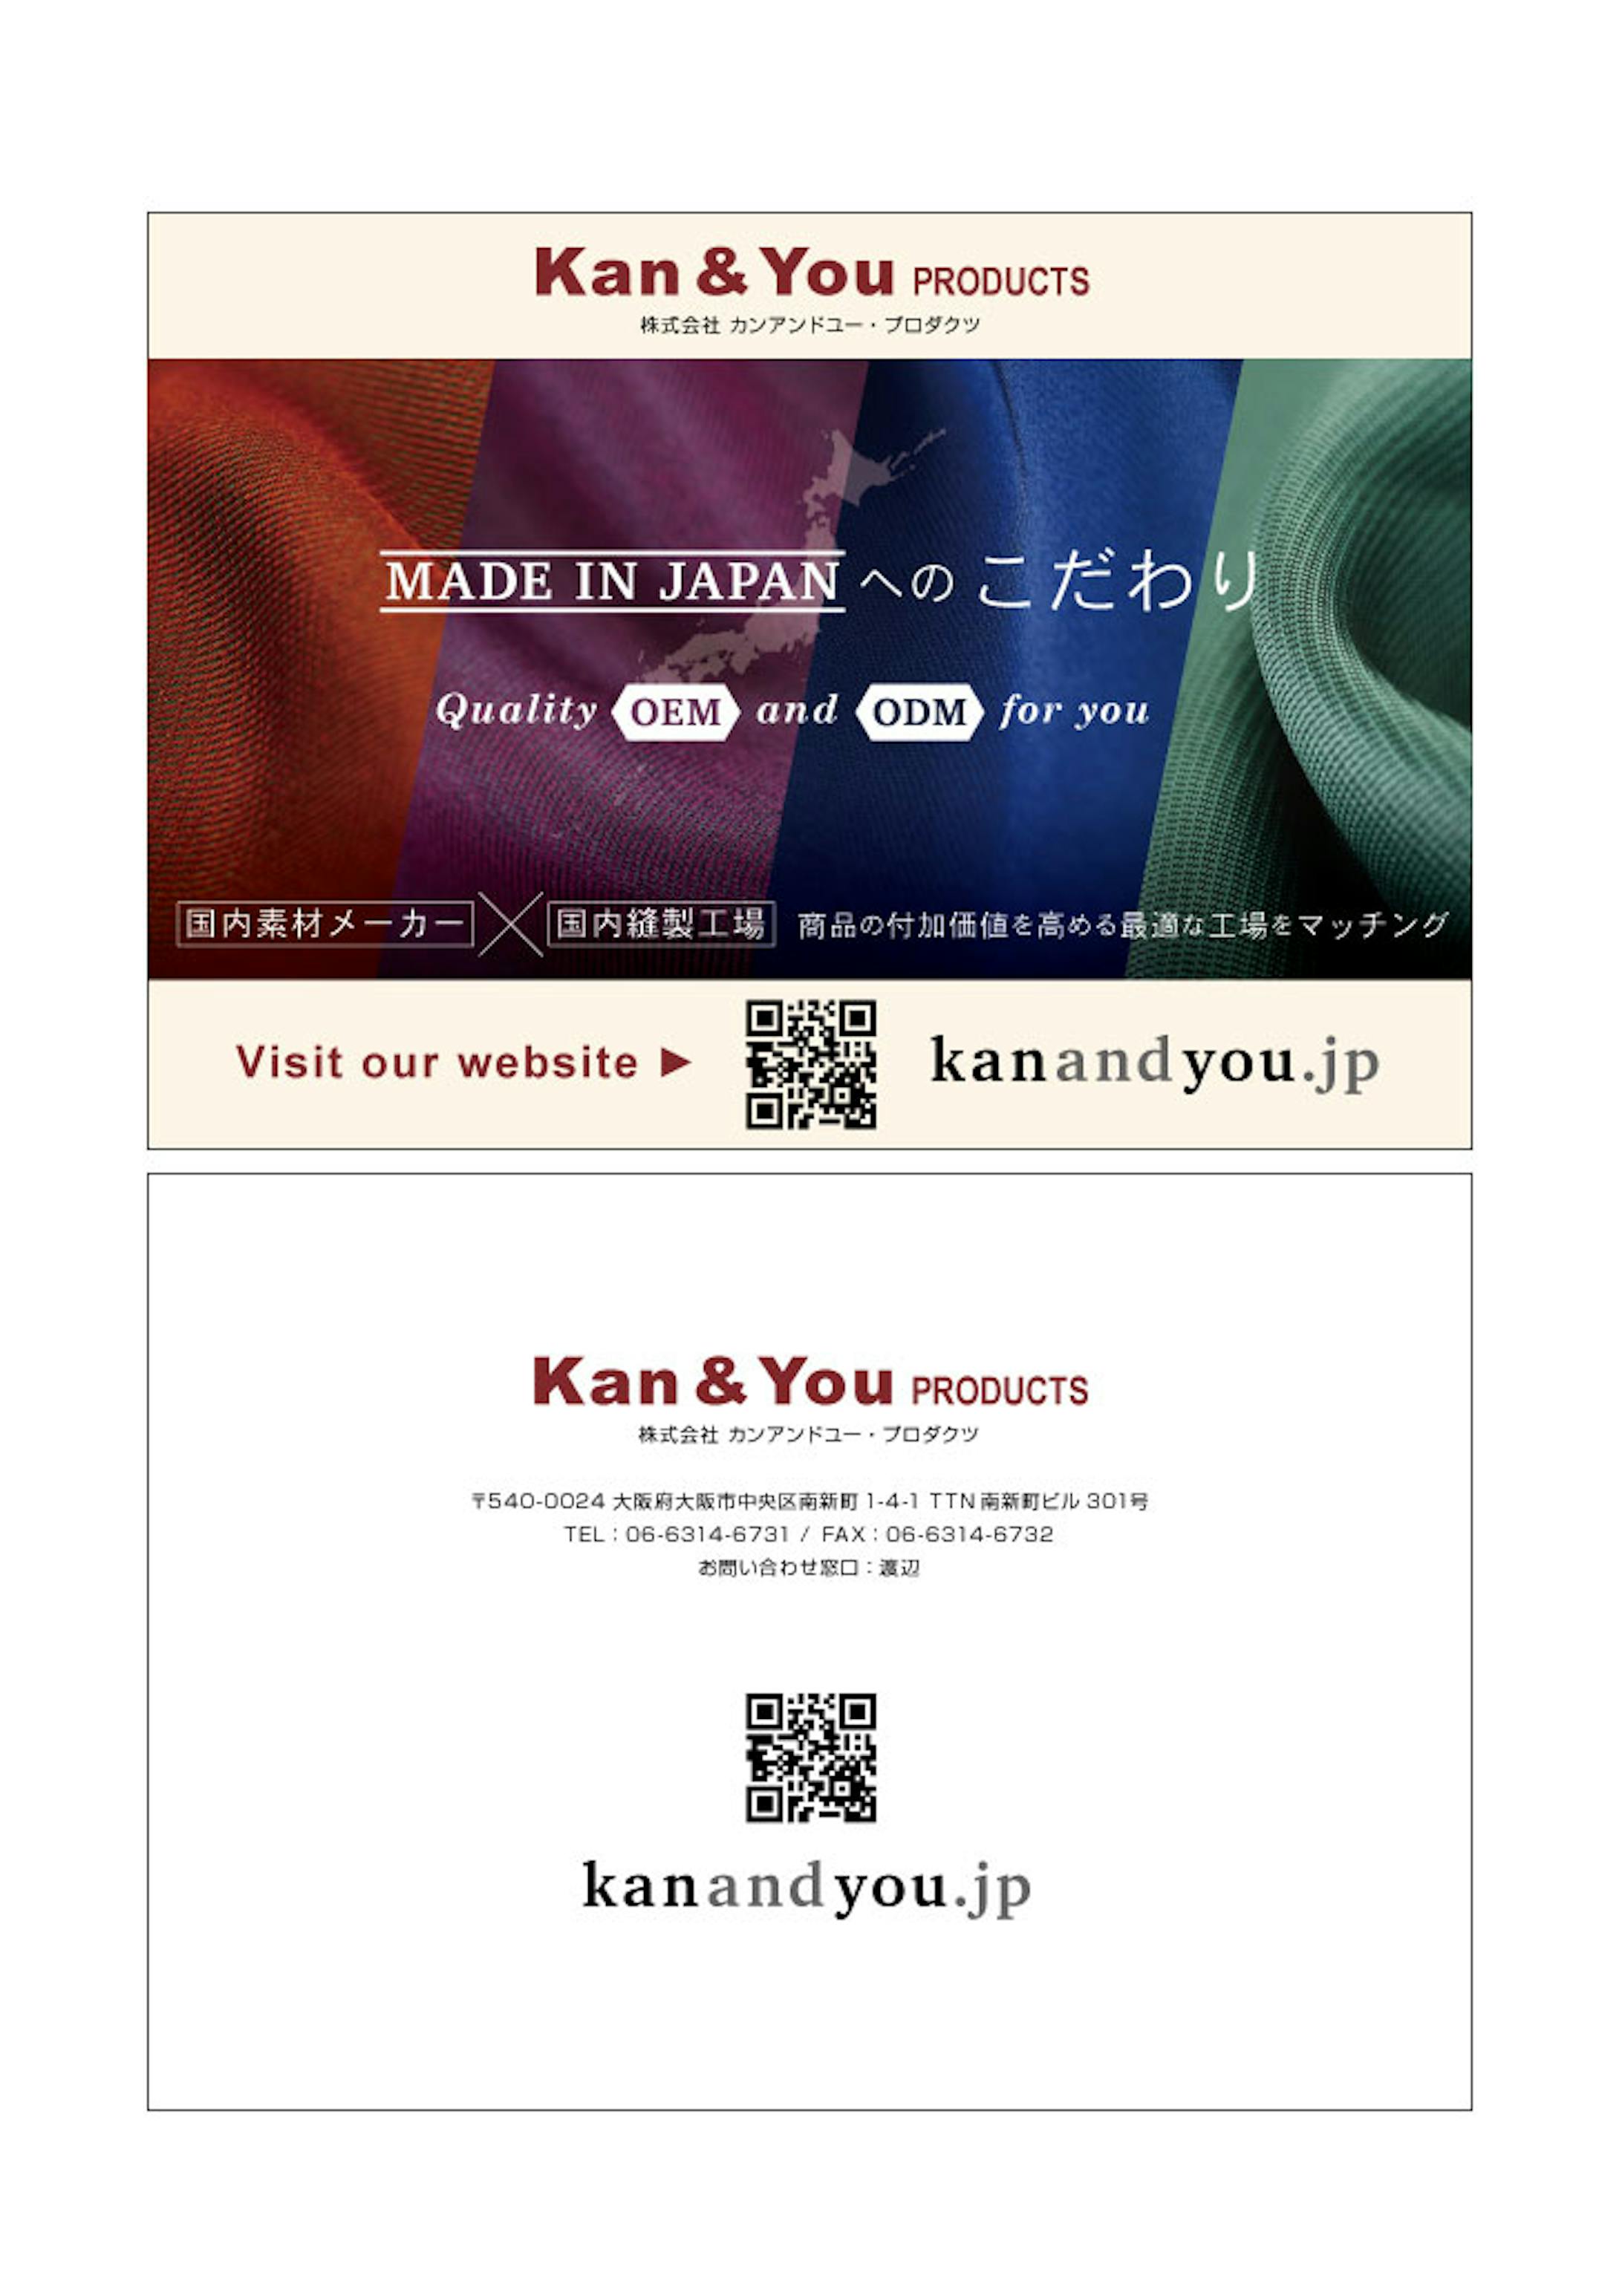 Kan&You PRODUCTS WEB & Brochure-3